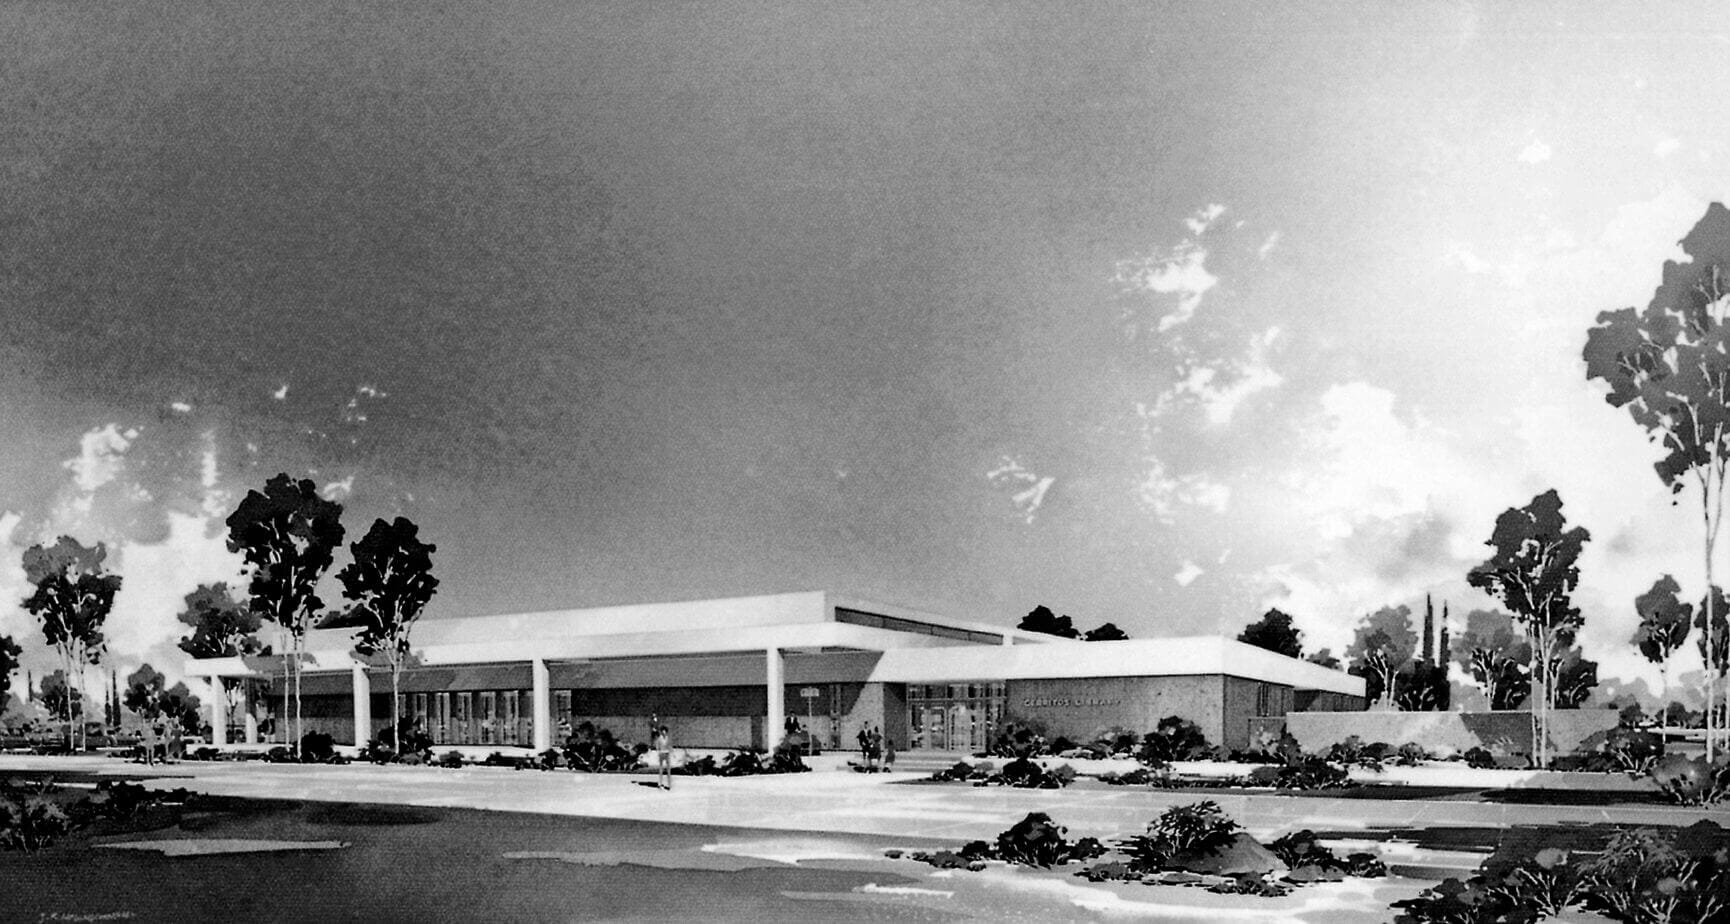 Mid-20th century architectural rendering of a modernist style building with landscaped surroundings.